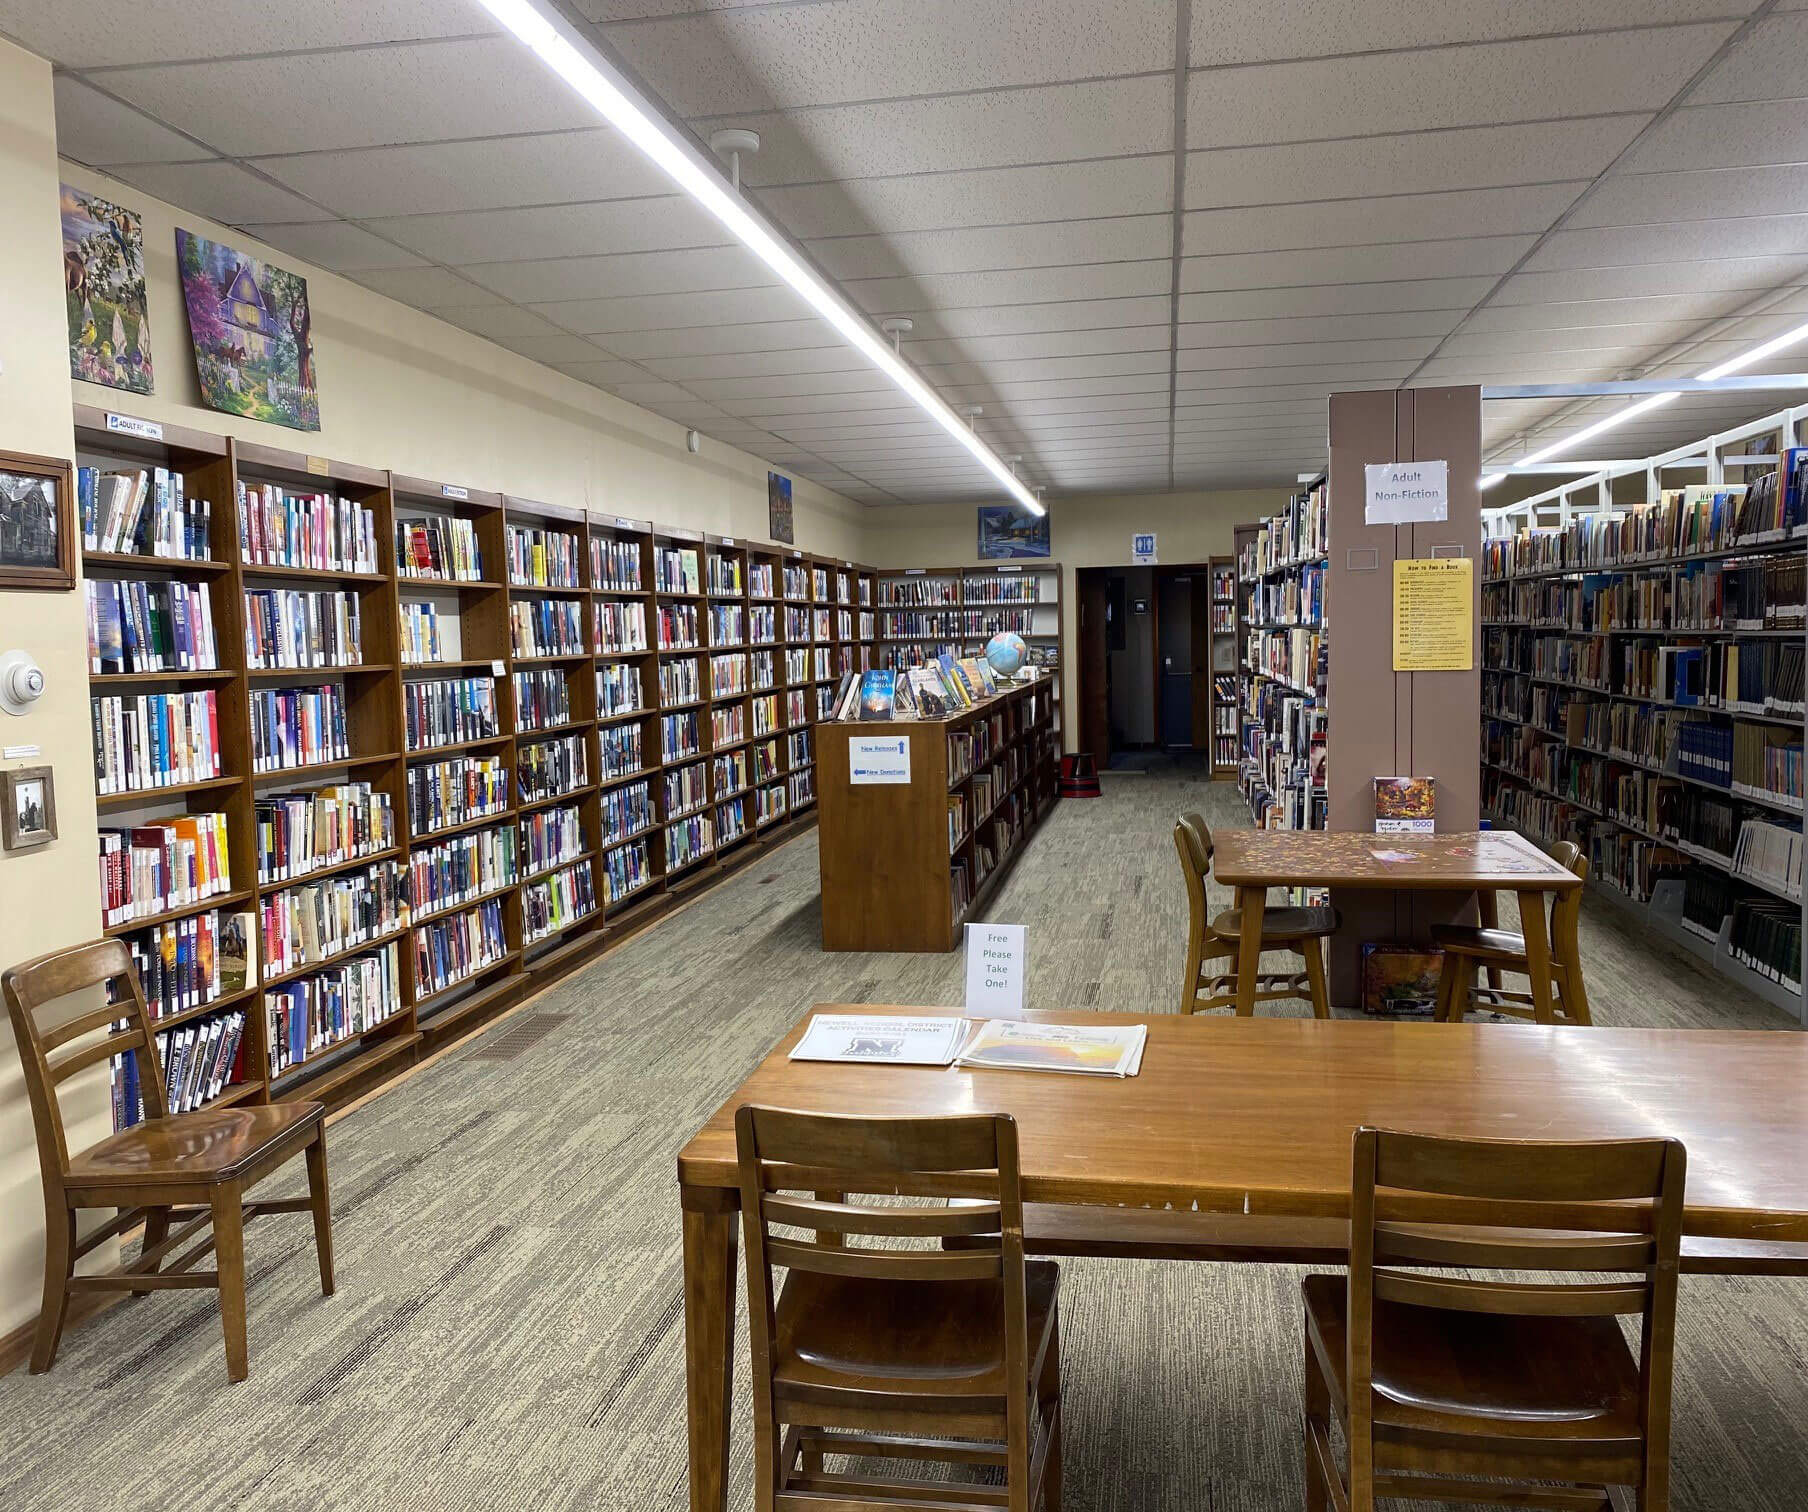 Books inside the Newell Public Library